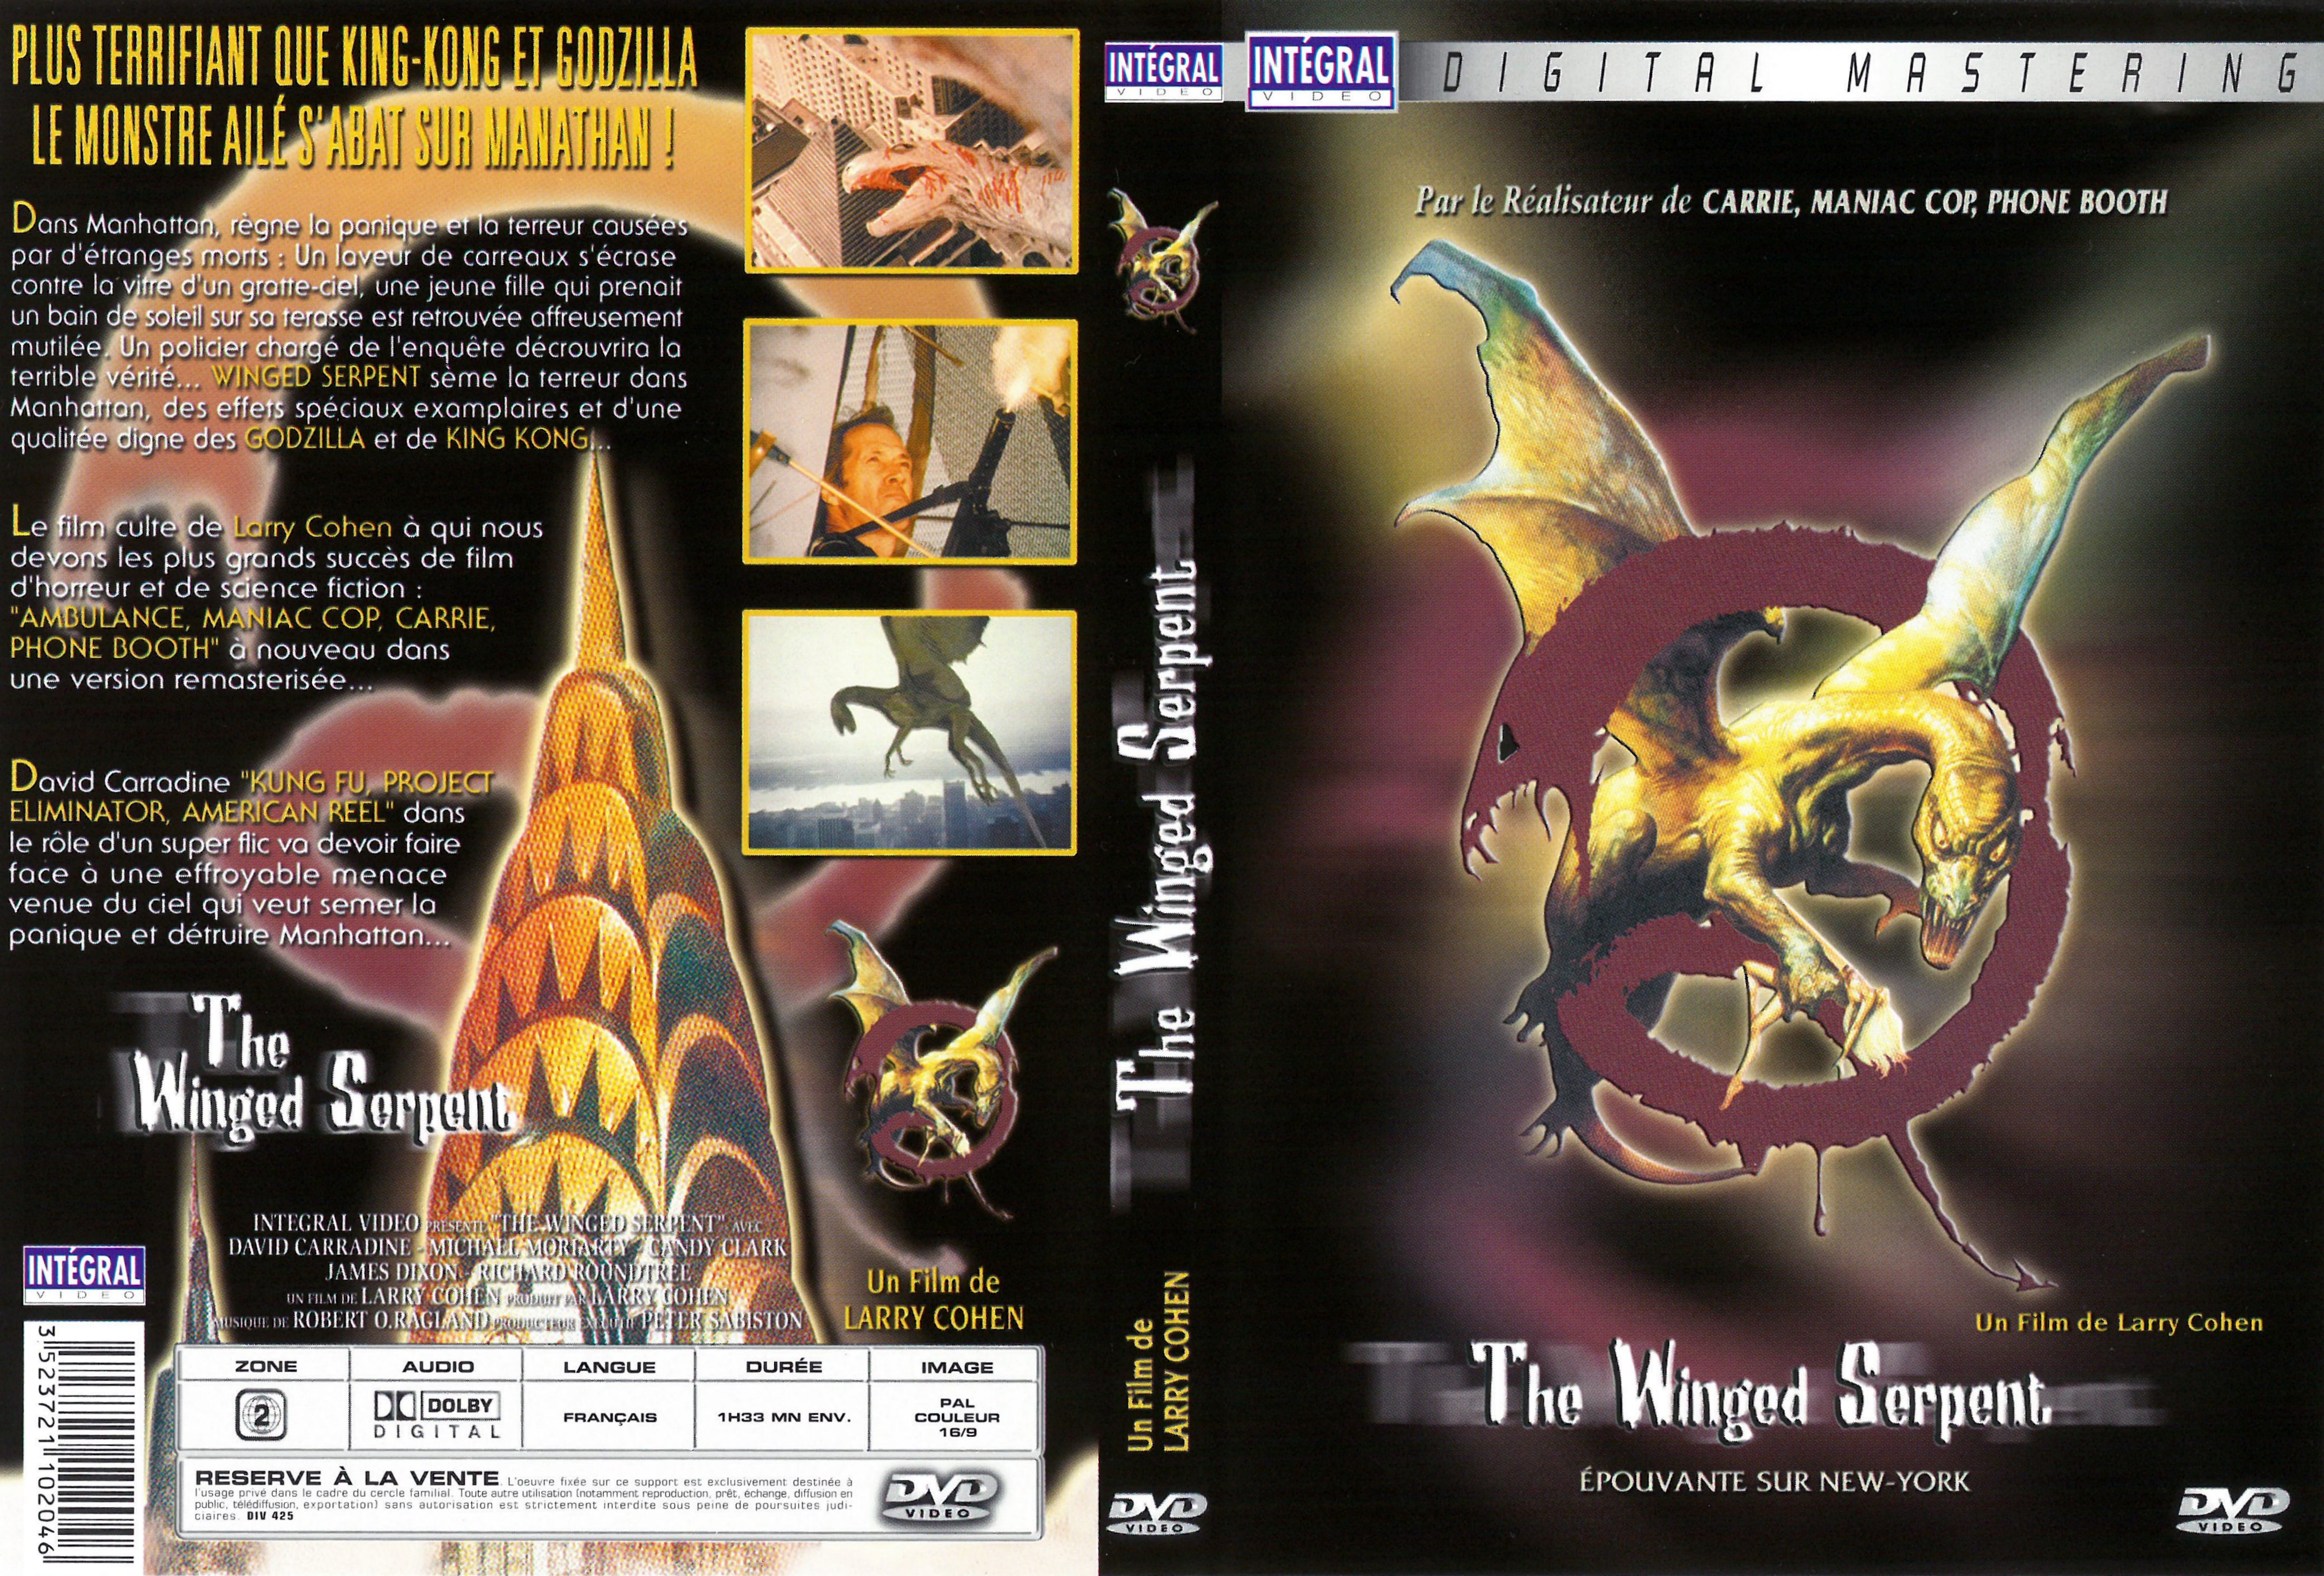 Jaquette DVD The winged serpent